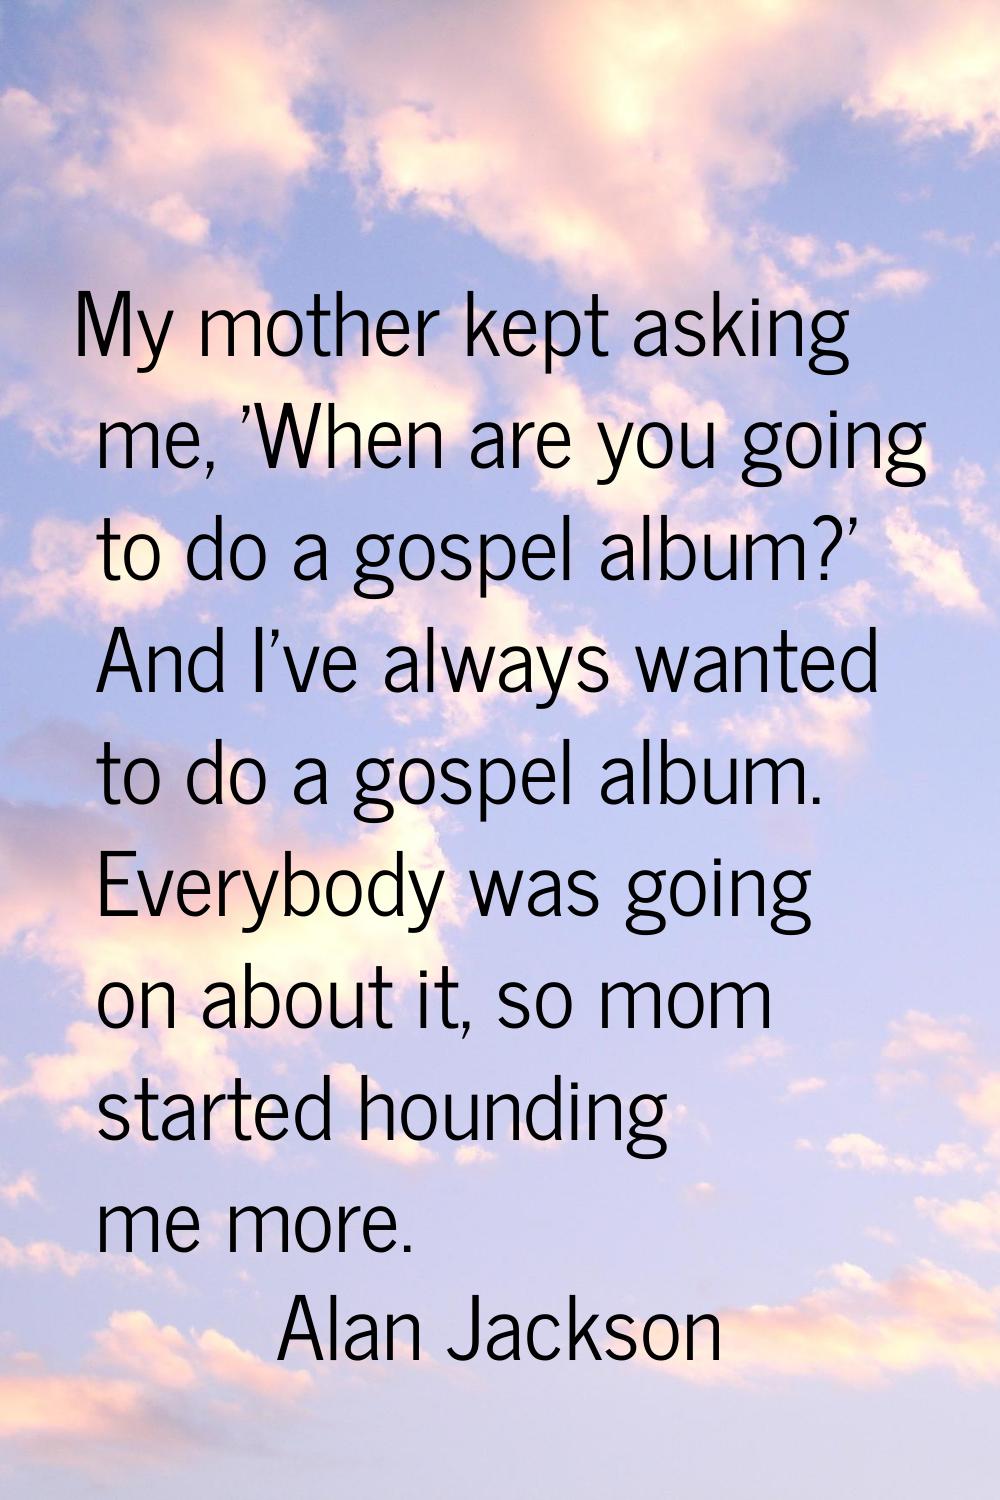 My mother kept asking me, 'When are you going to do a gospel album?' And I've always wanted to do a